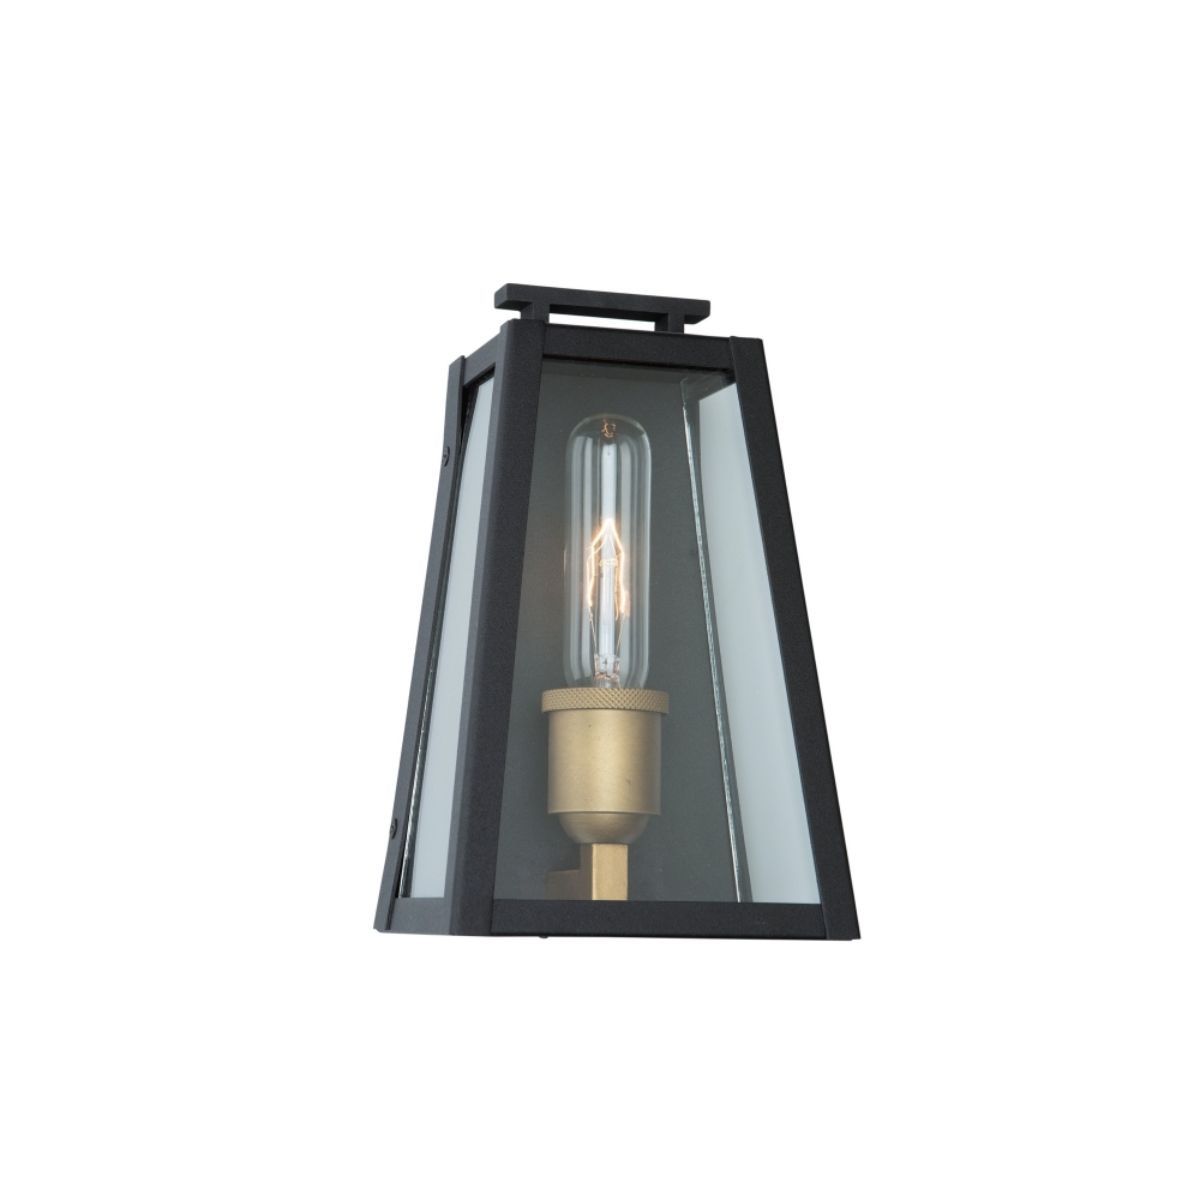 Charlestown 9 in. Outdoor Wall Sconce Black Finish